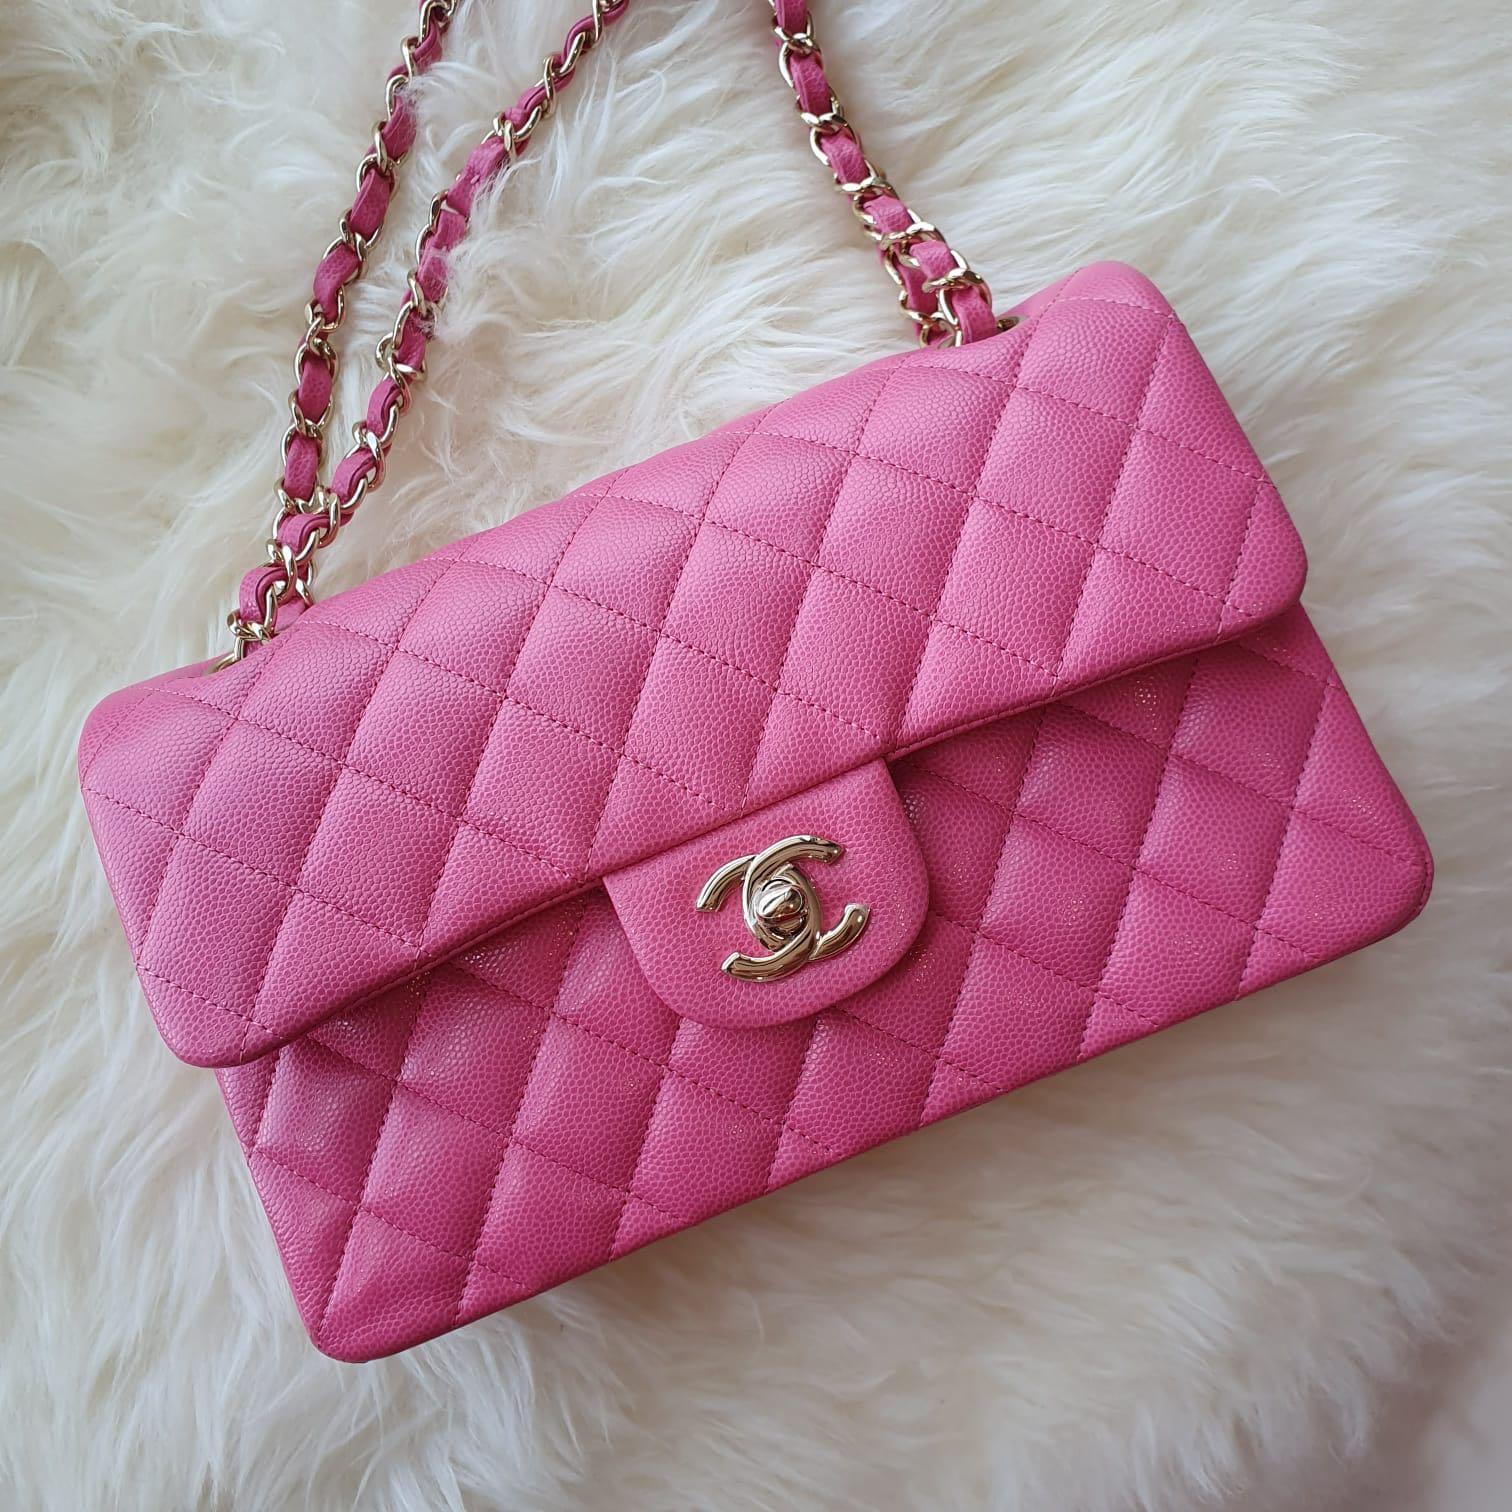 Chanel Classic flap in bubble gum pink lghw ( small)